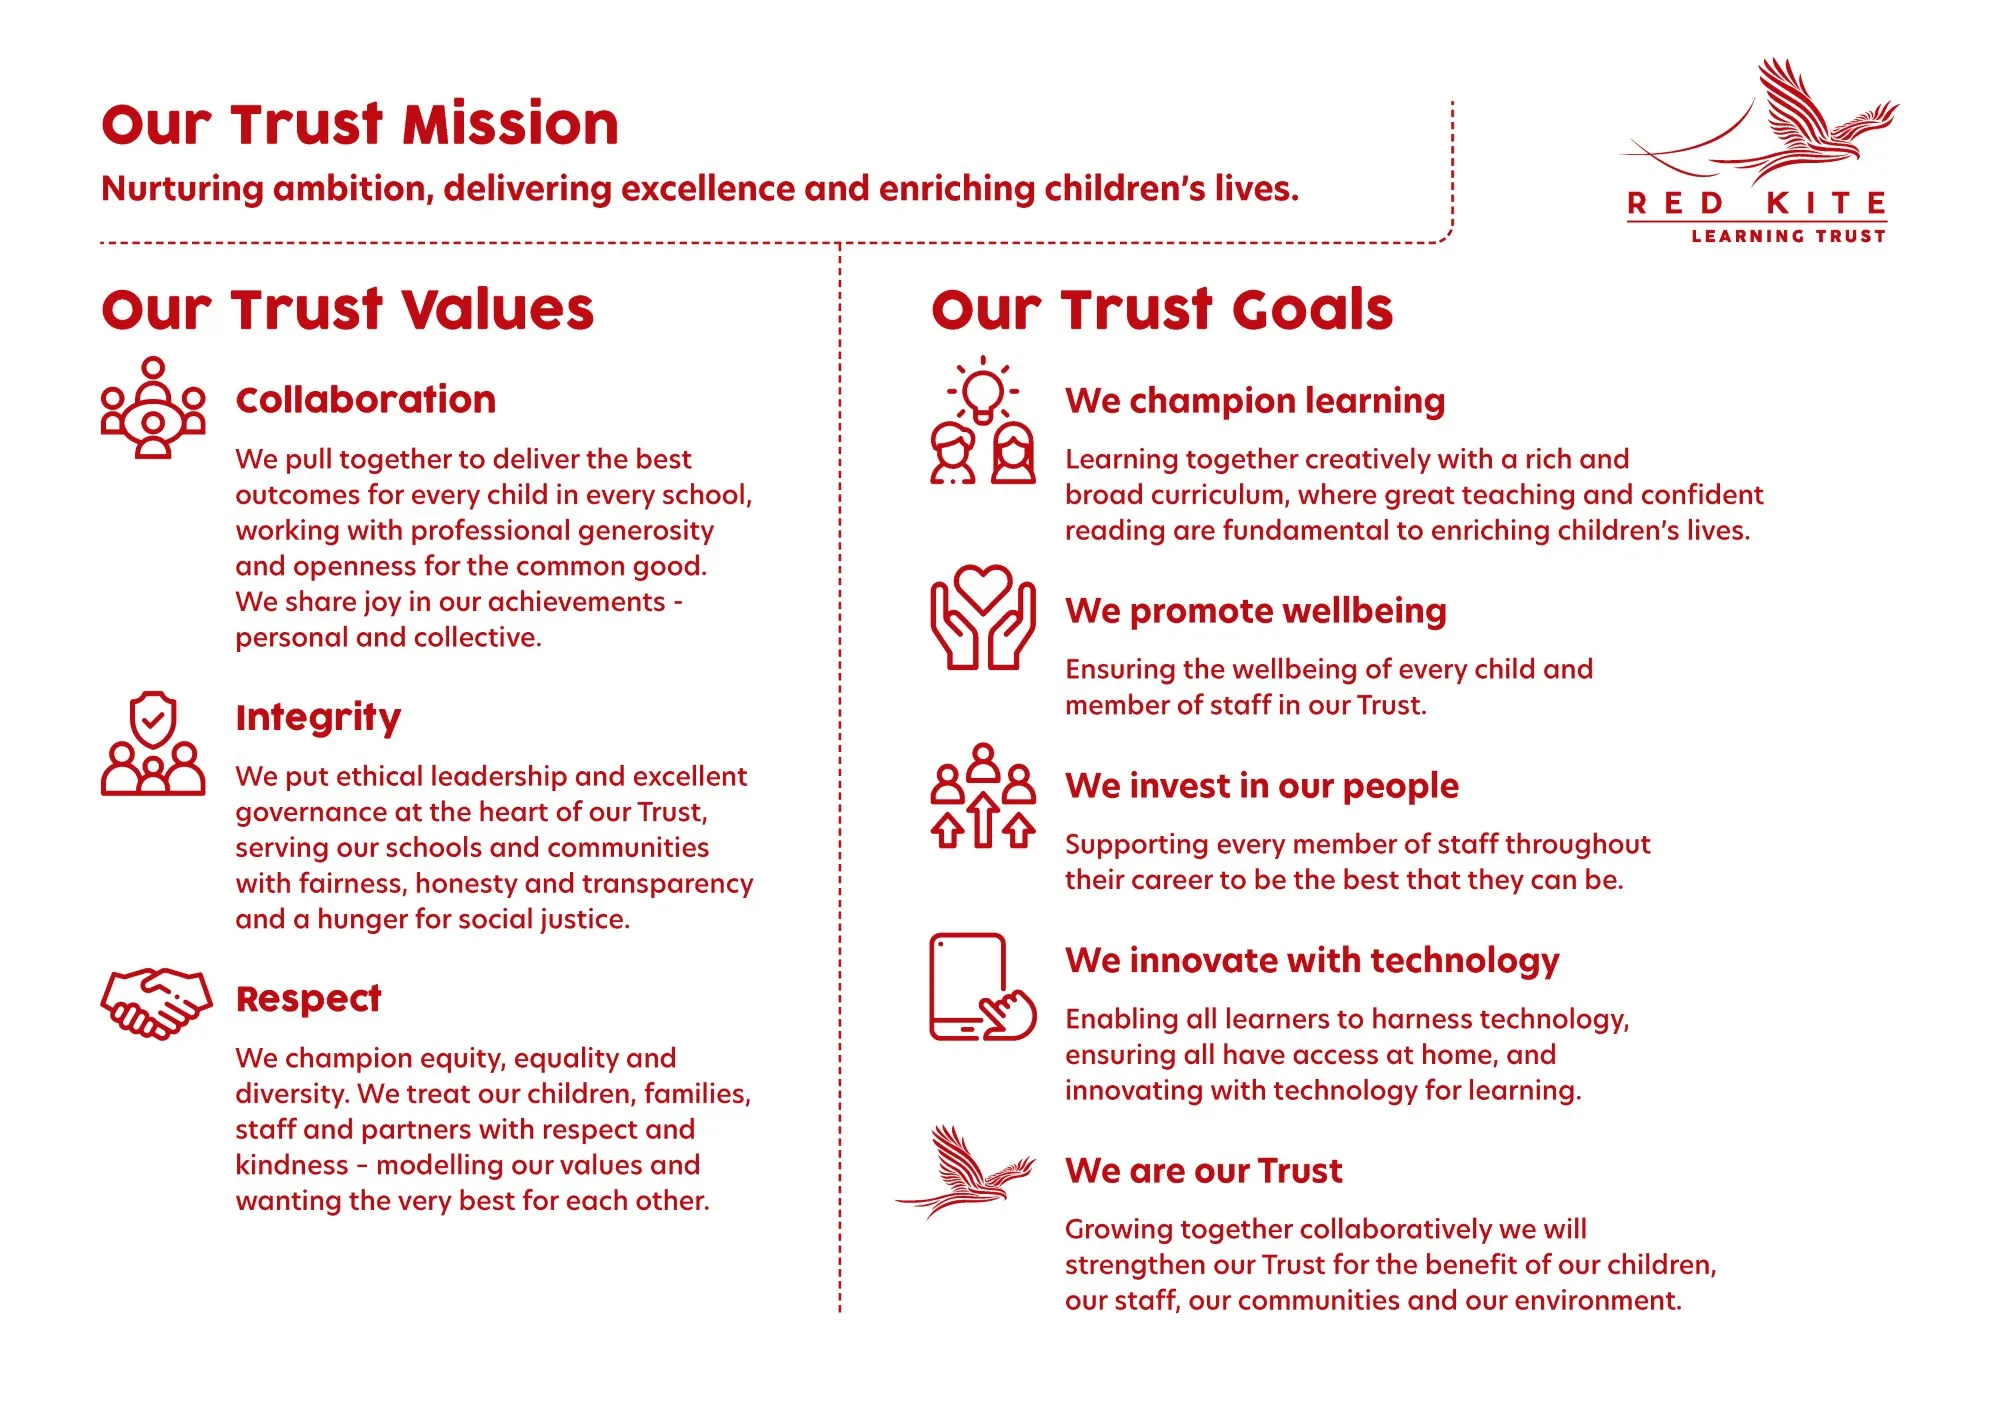 Red Kite Learning Trust - Mission, Values and Goals_Red_Landscape (Custom)